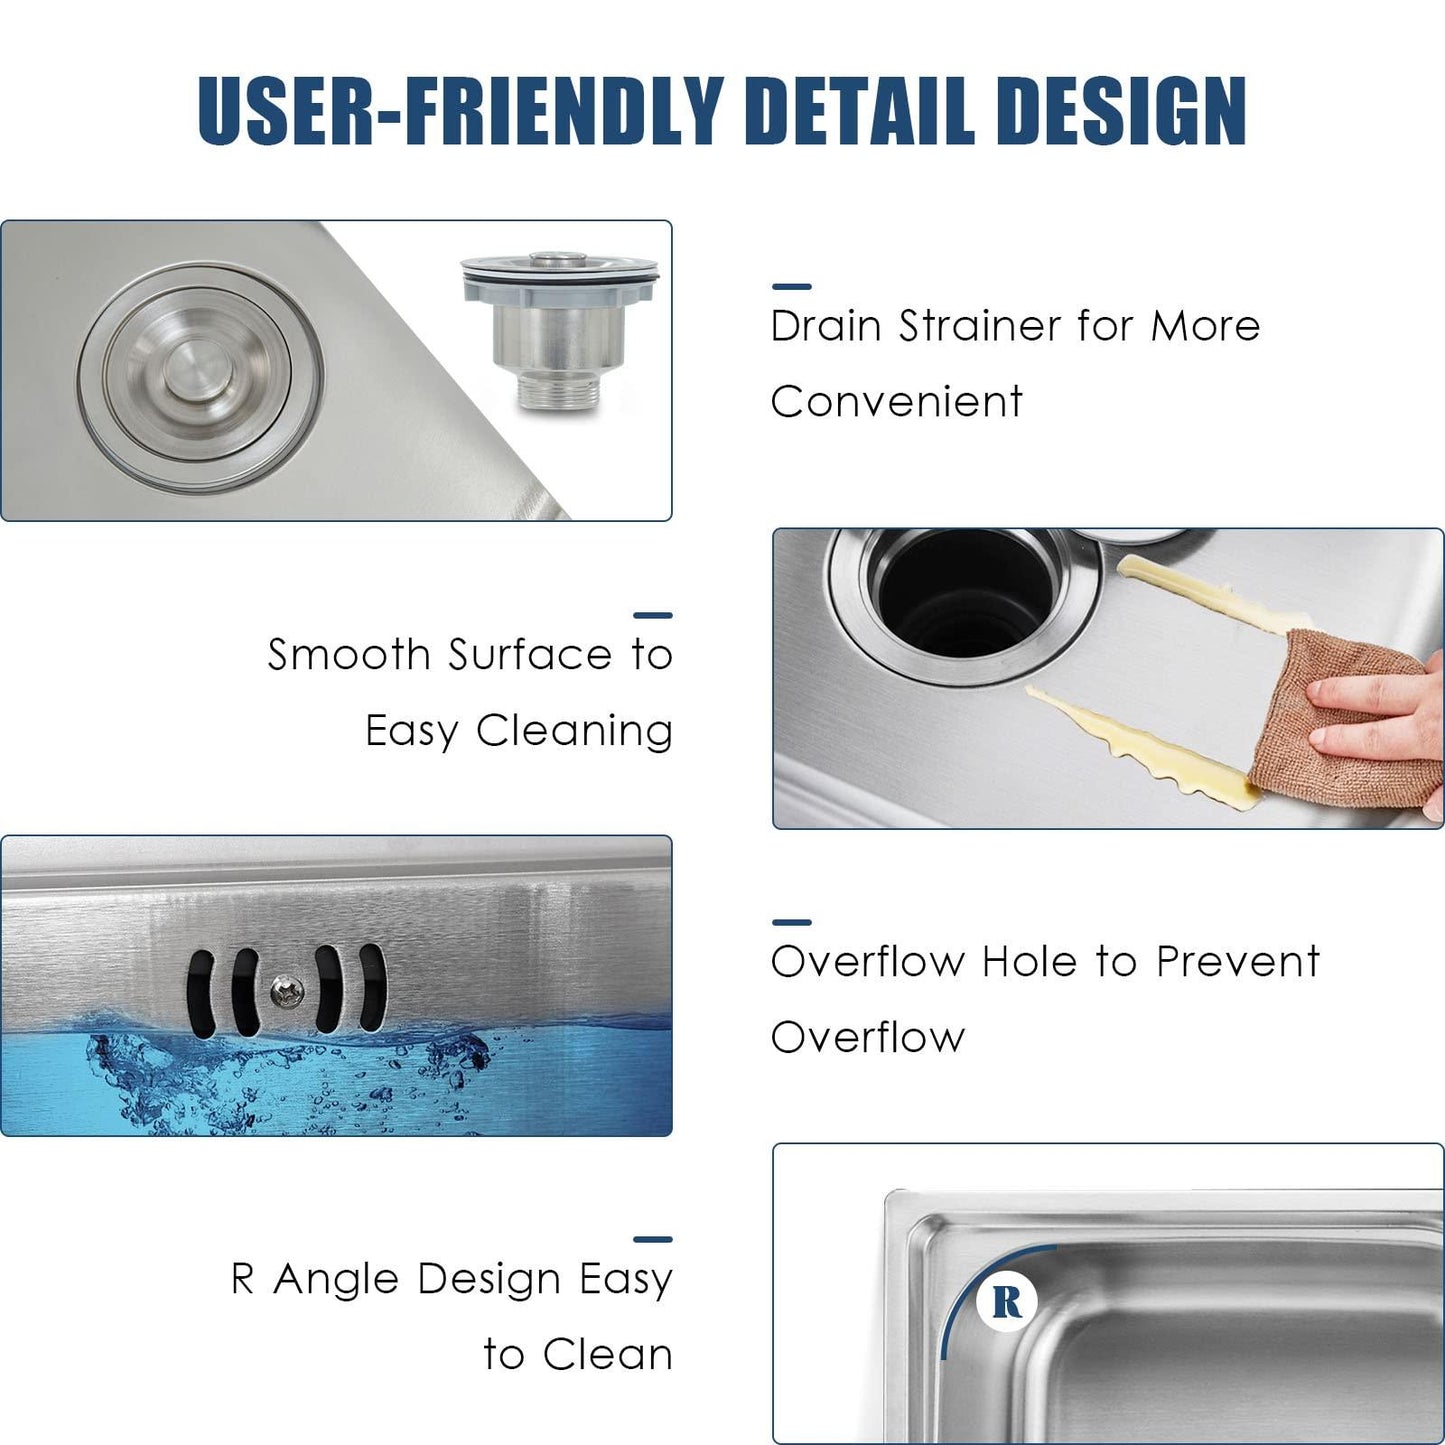 Stainless Steel Utility Sink Single Bowl, Outdoor Garden Sink Freestanding Commercial Restaurant Sink Anti-overflow with Faucet Drain Basket Shelf Towel Bar, for Kitchen, Laundry Room, Garage - CookCave